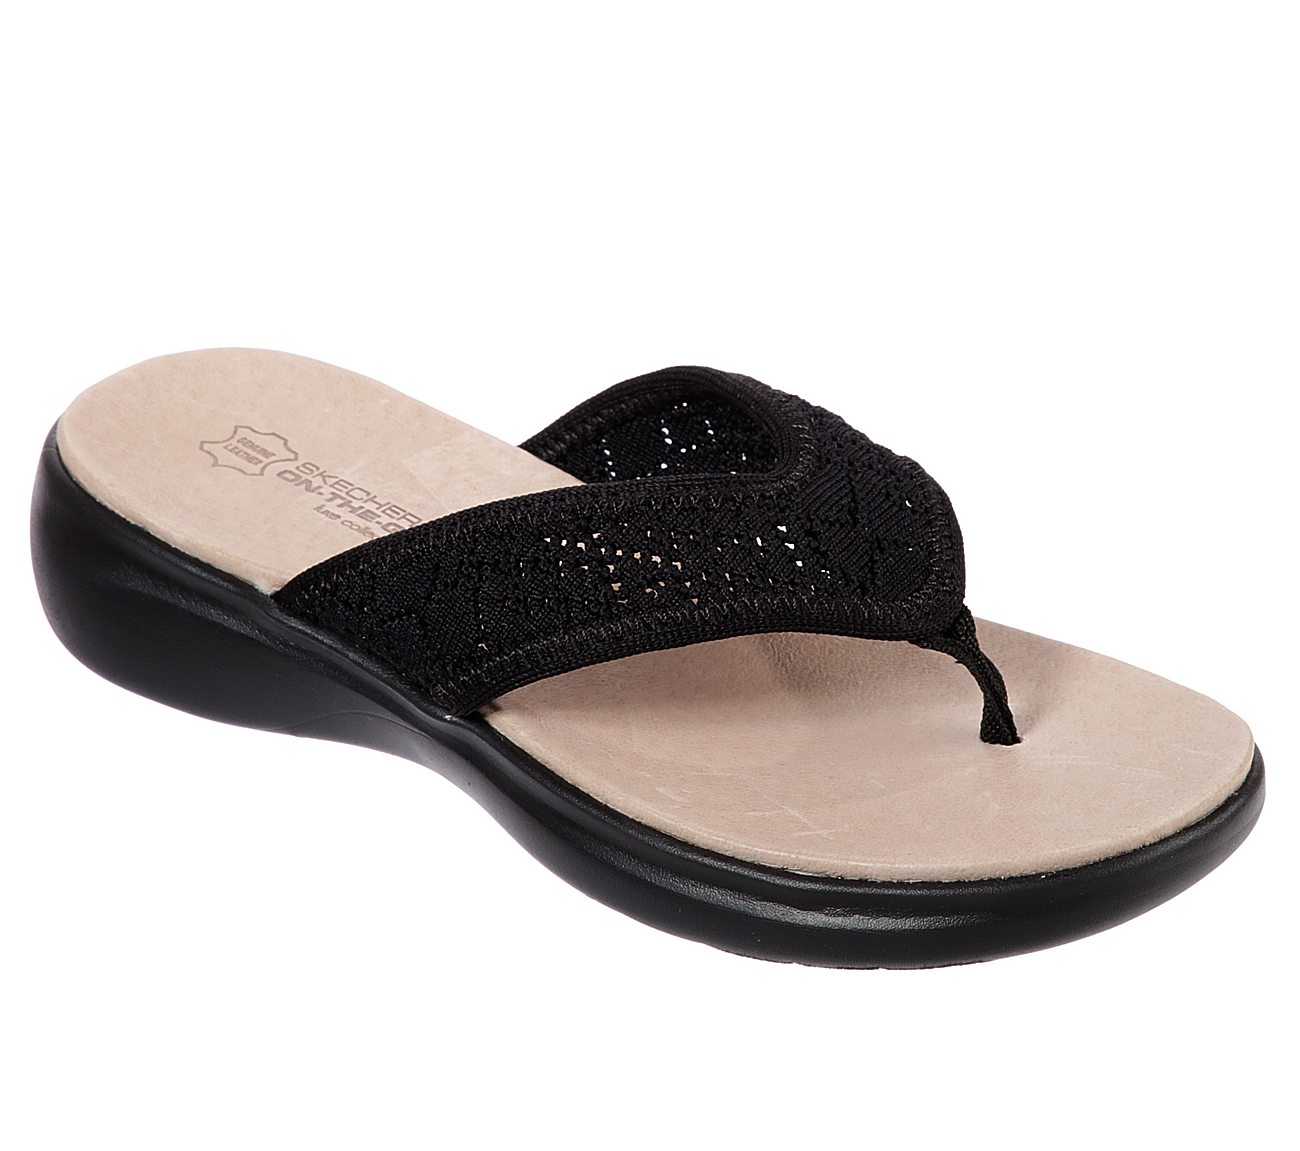 skechers on the go lightweight thong sandals